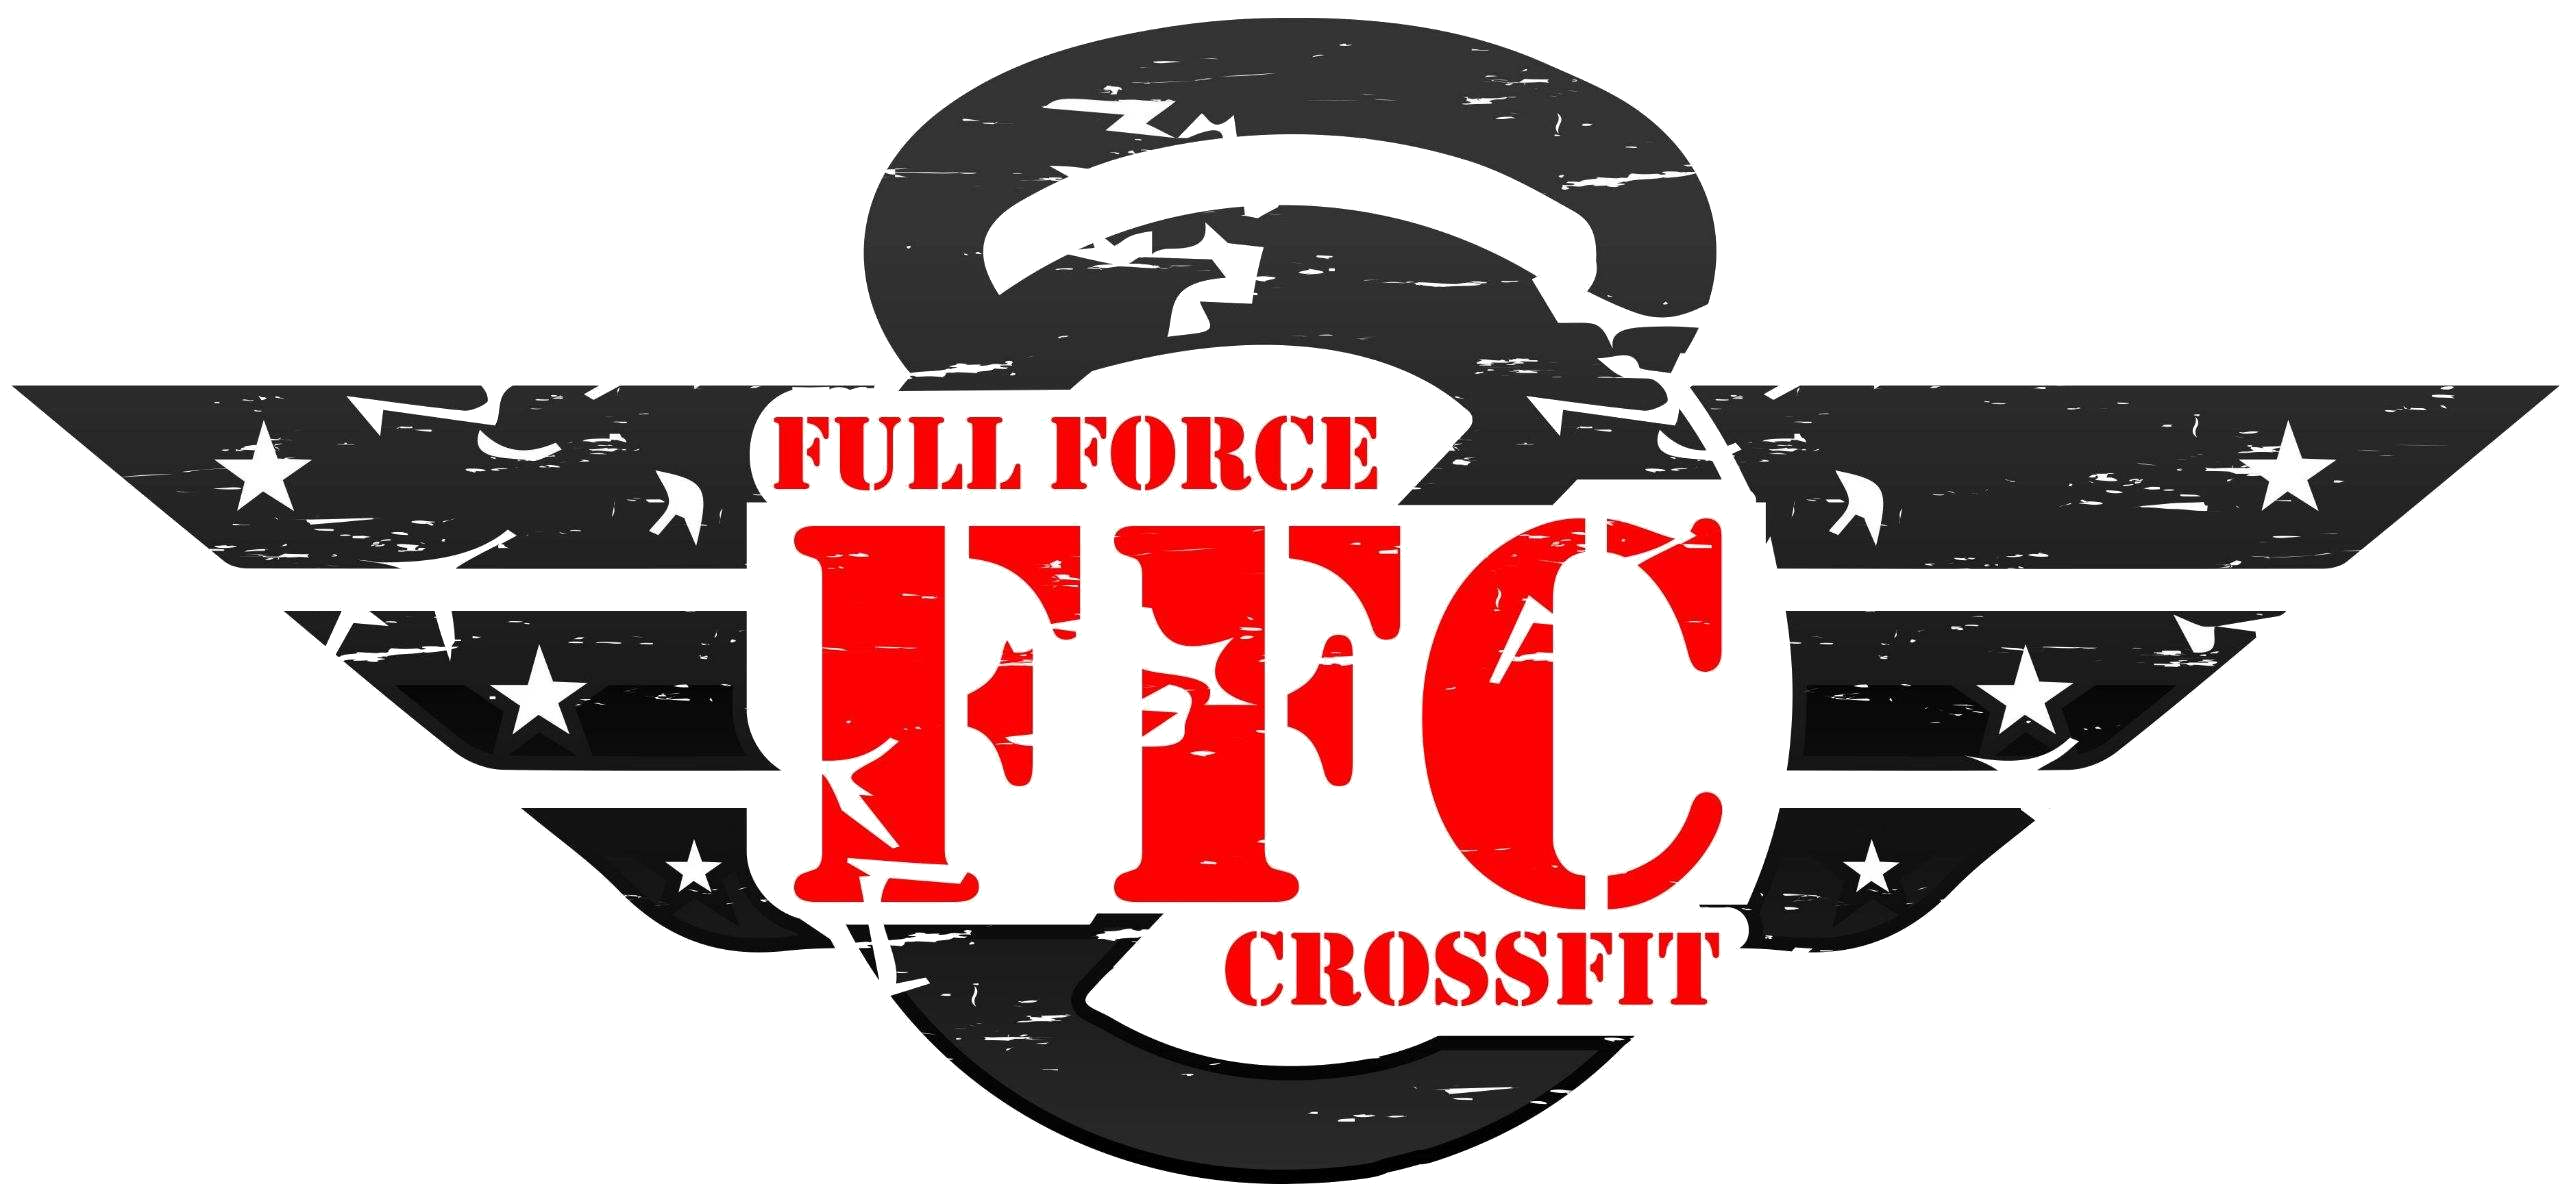 Looking for our CrossFit? Click Here!